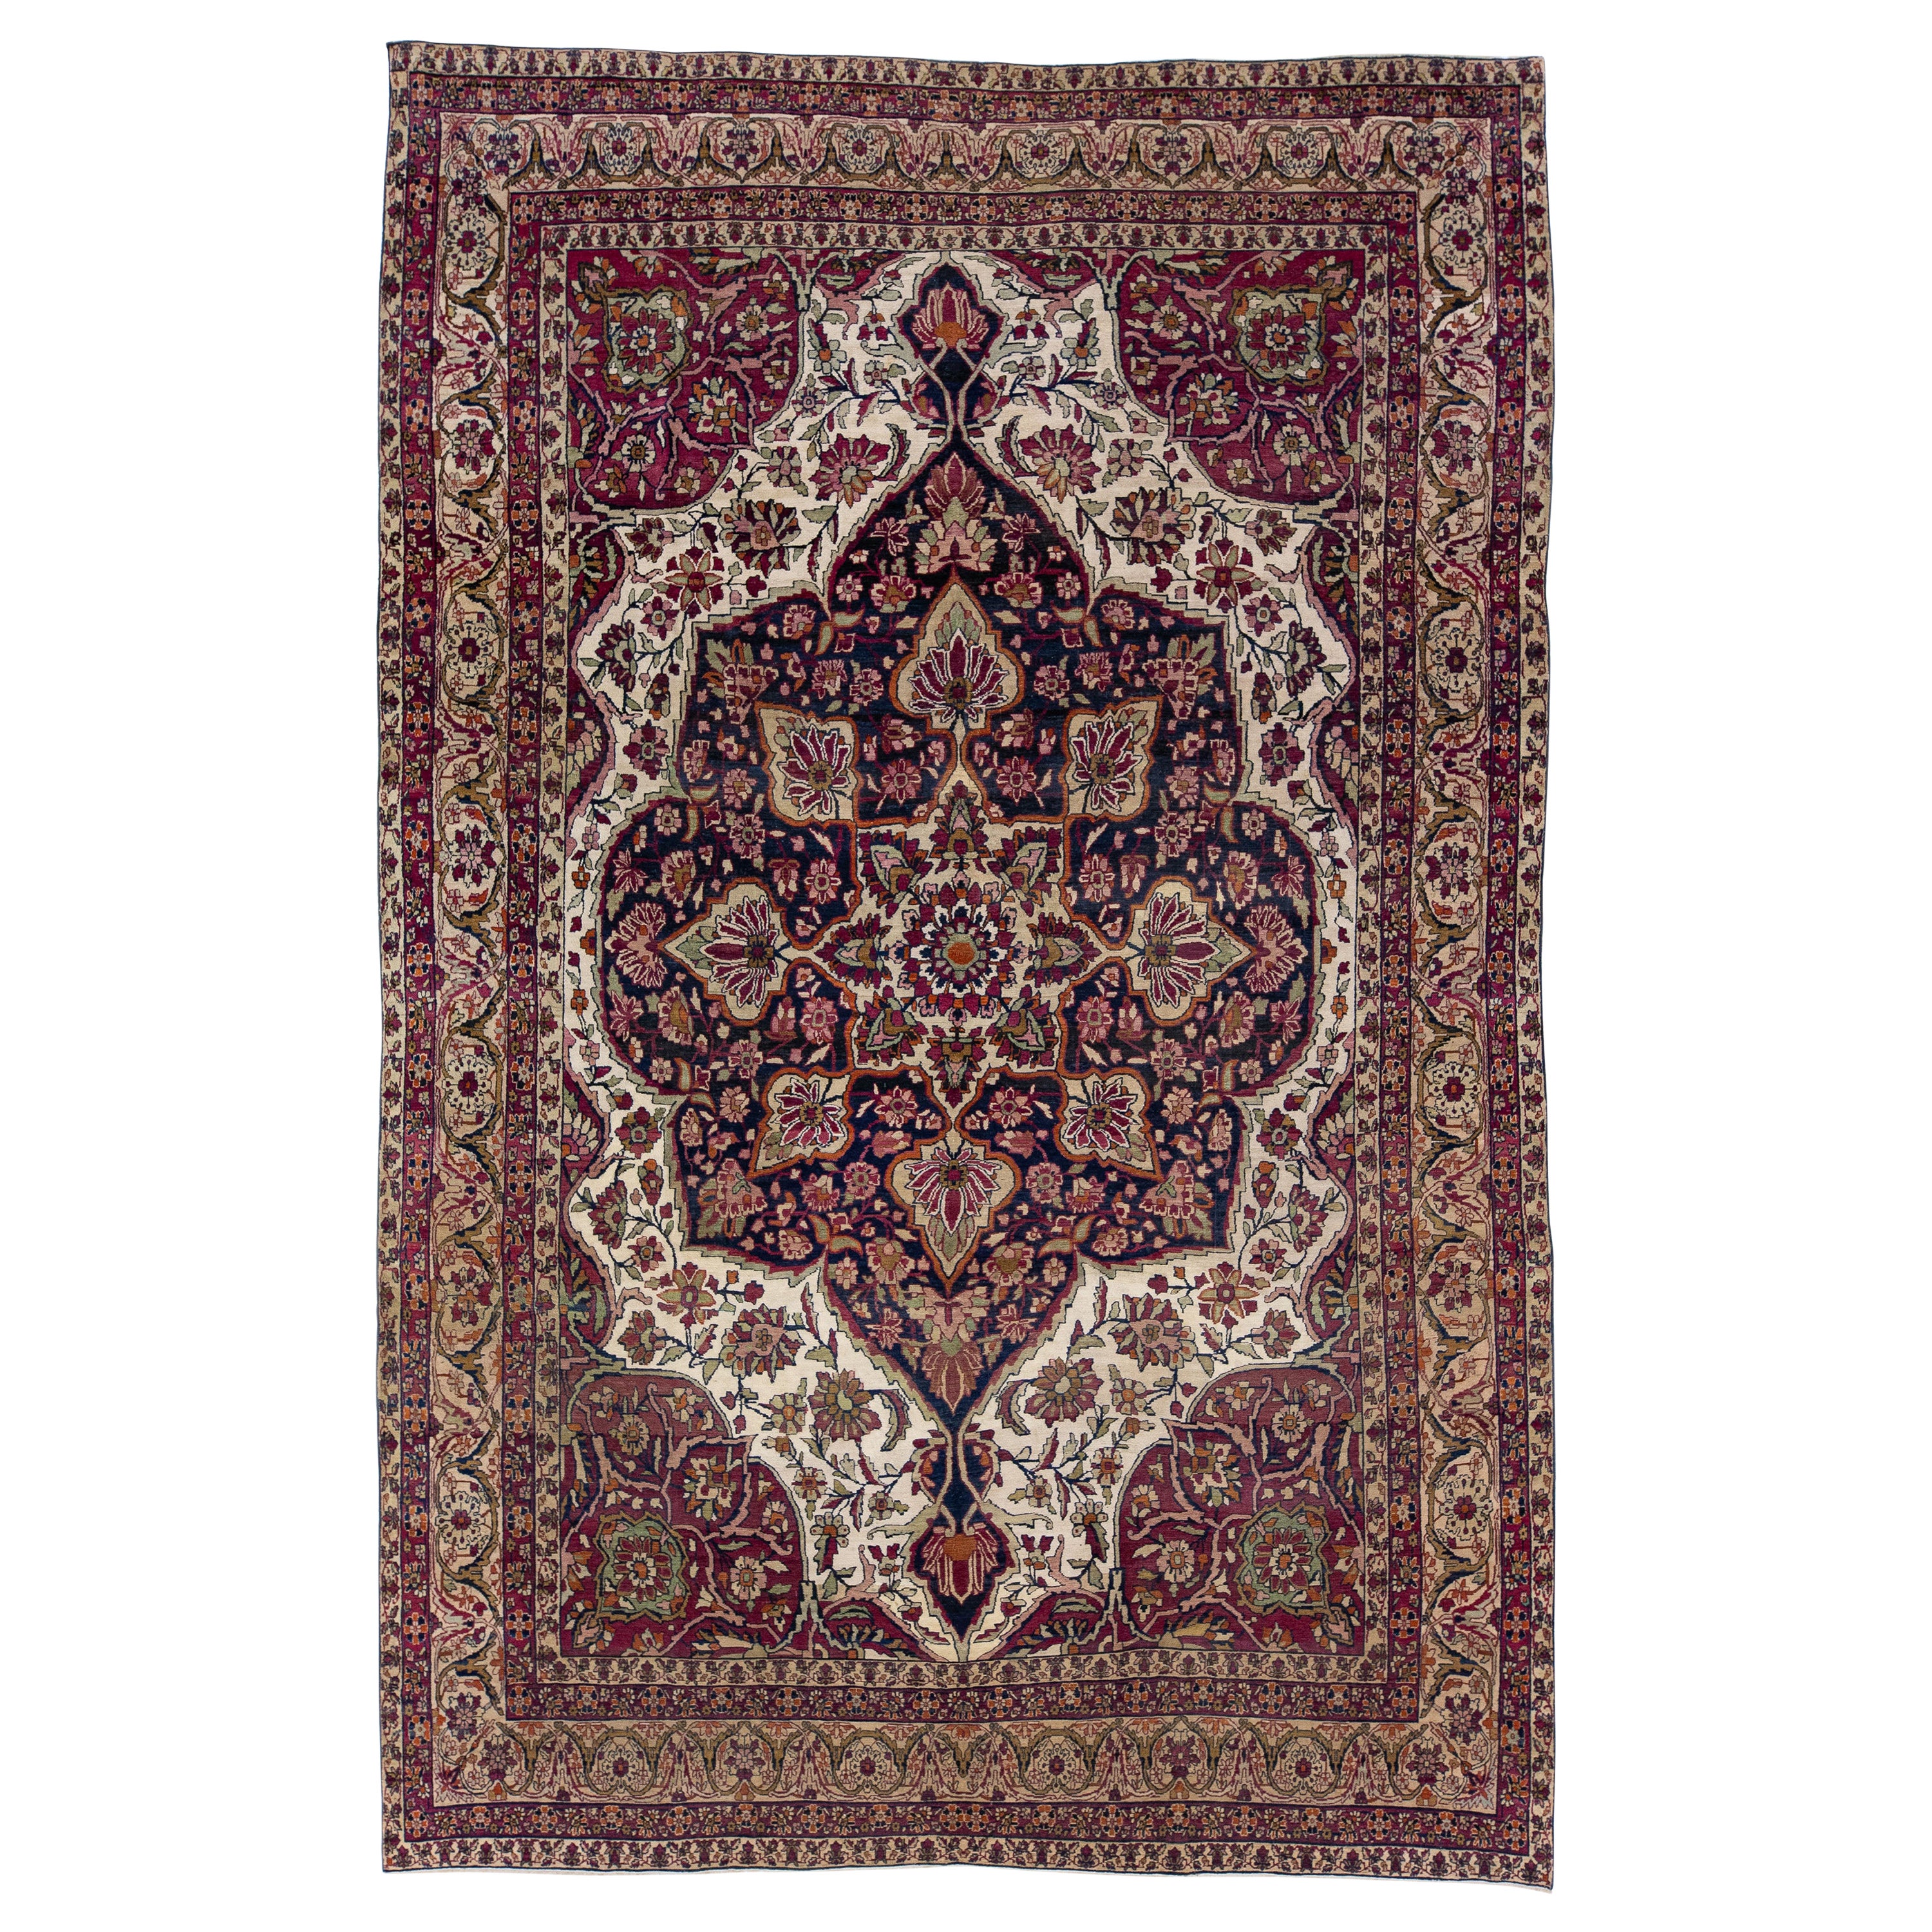 1880's Antique Persian Kerman Handmade Wool Rug with Multicolor Medallion Design For Sale